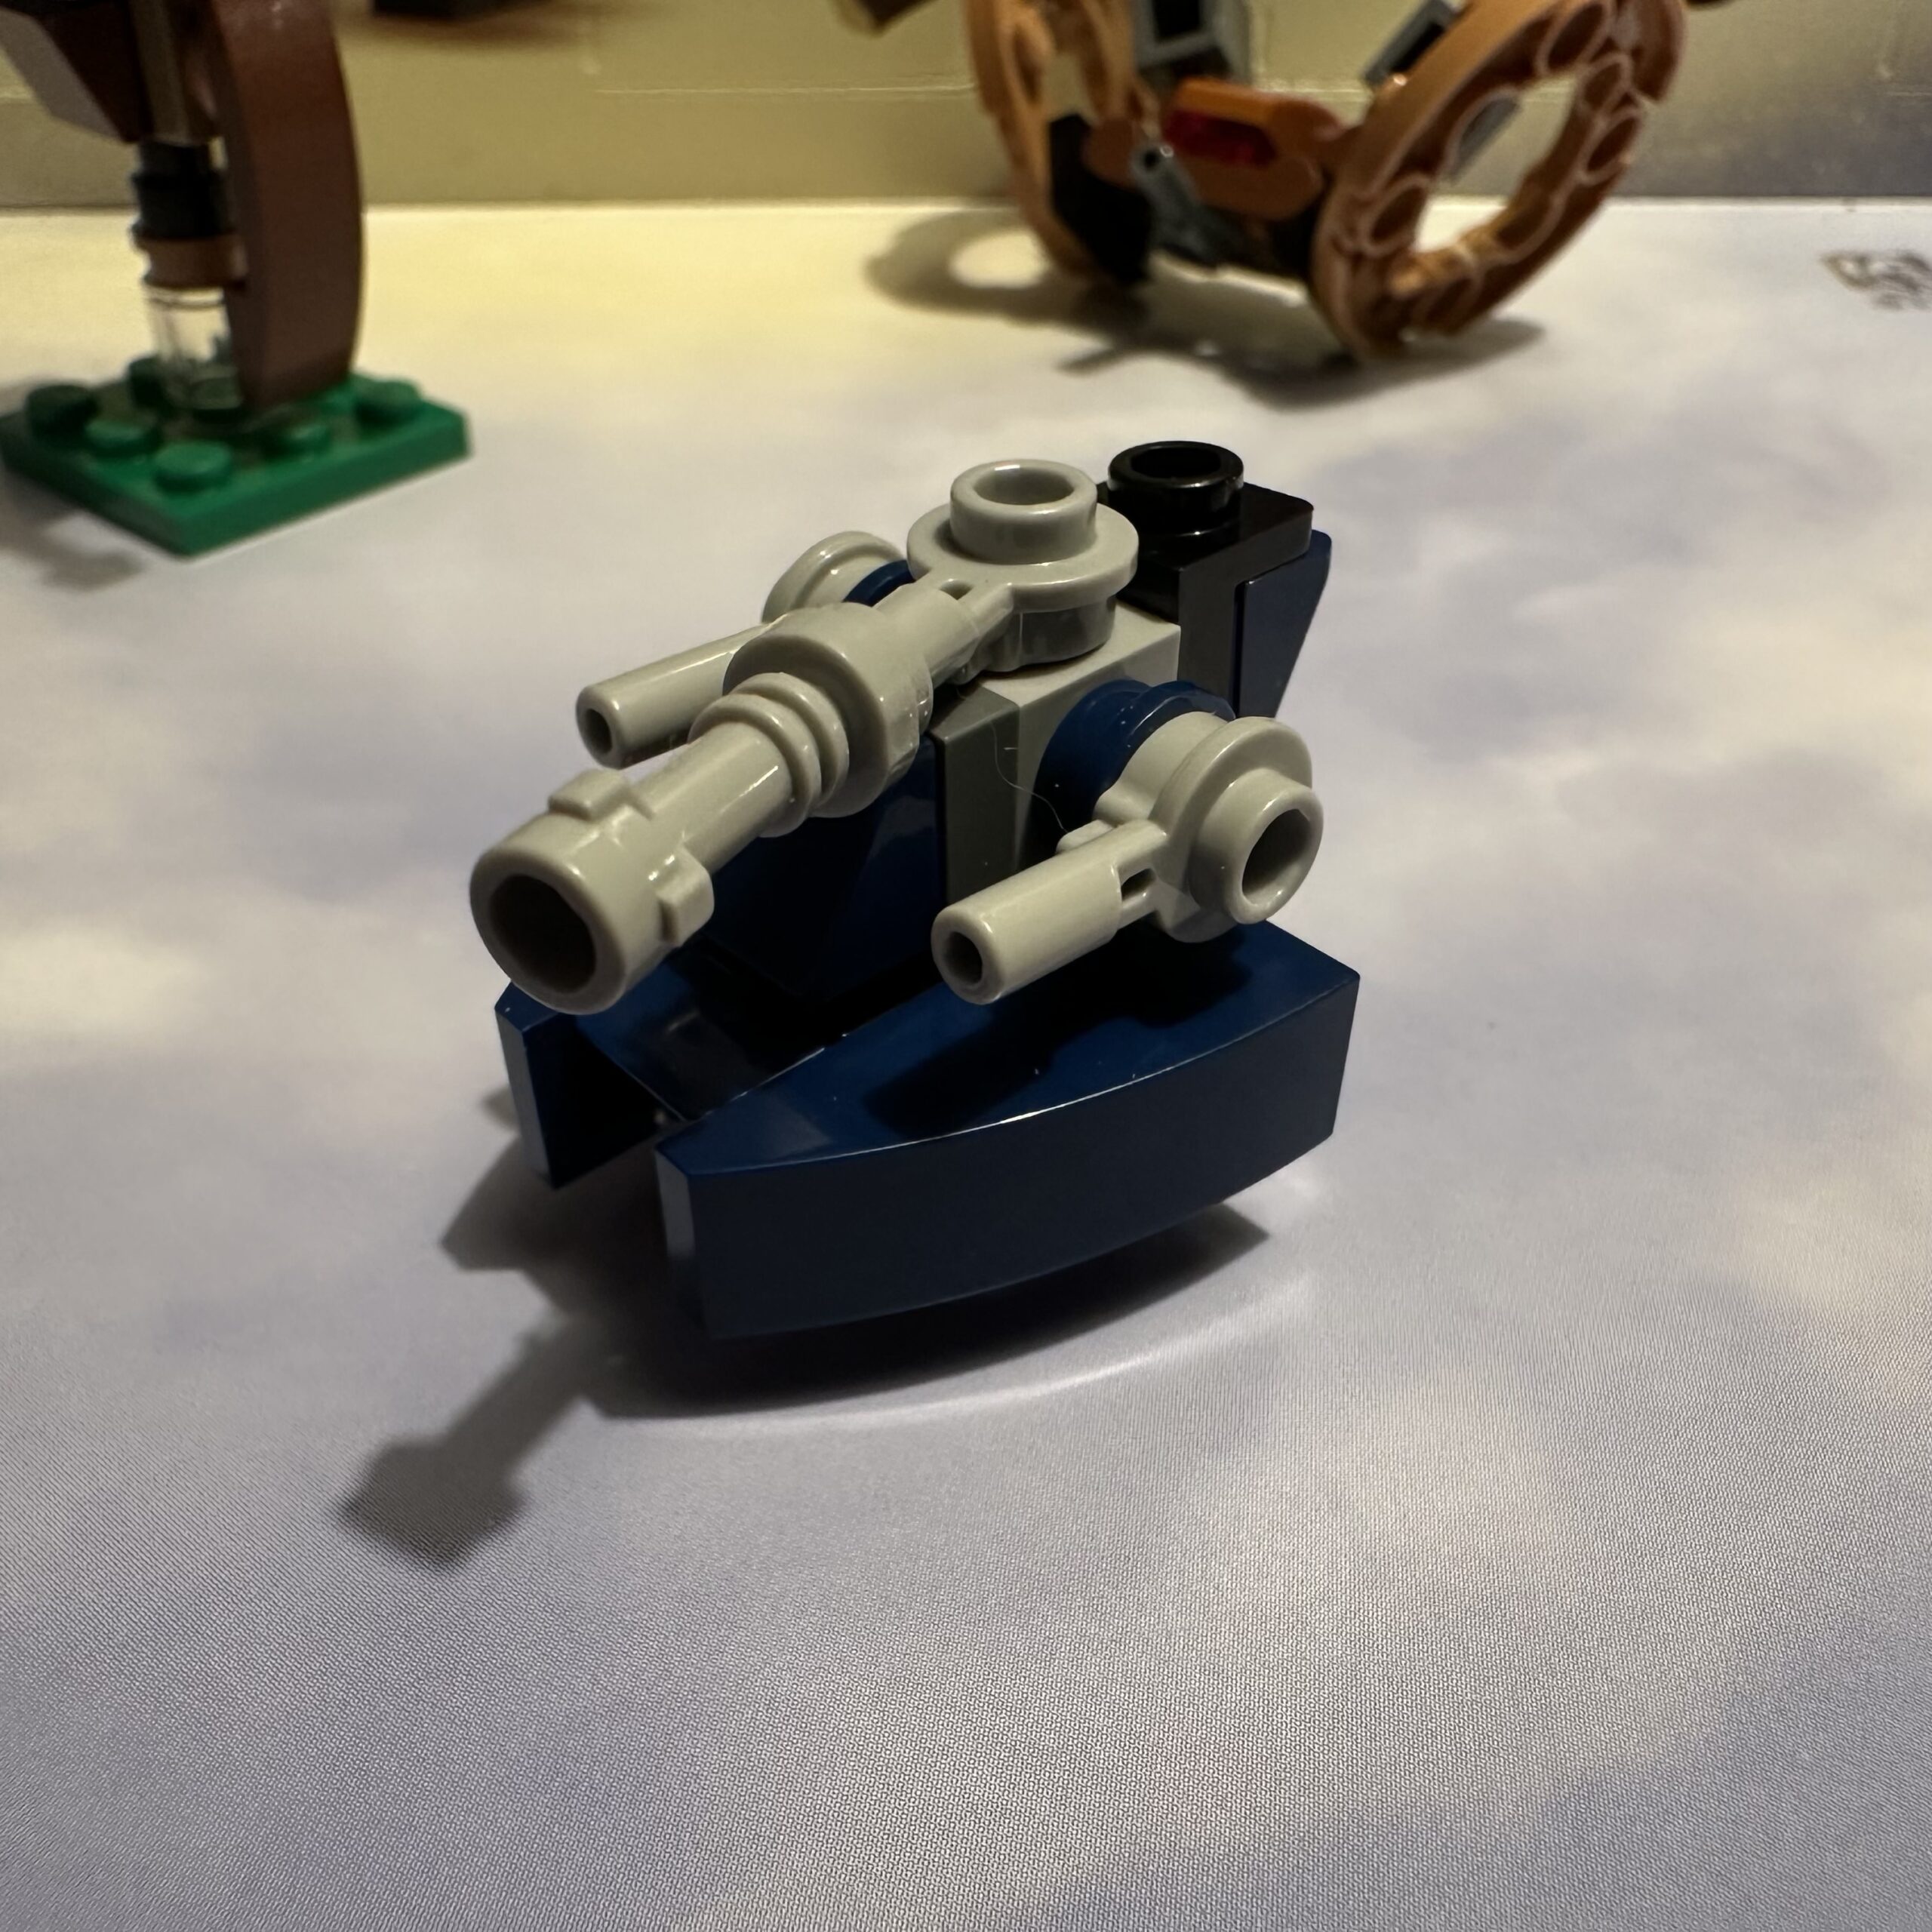 LEGO micro-build of a tank with a dark blue lower body and light gray upper. There are two small side cannons and one large central cannon.